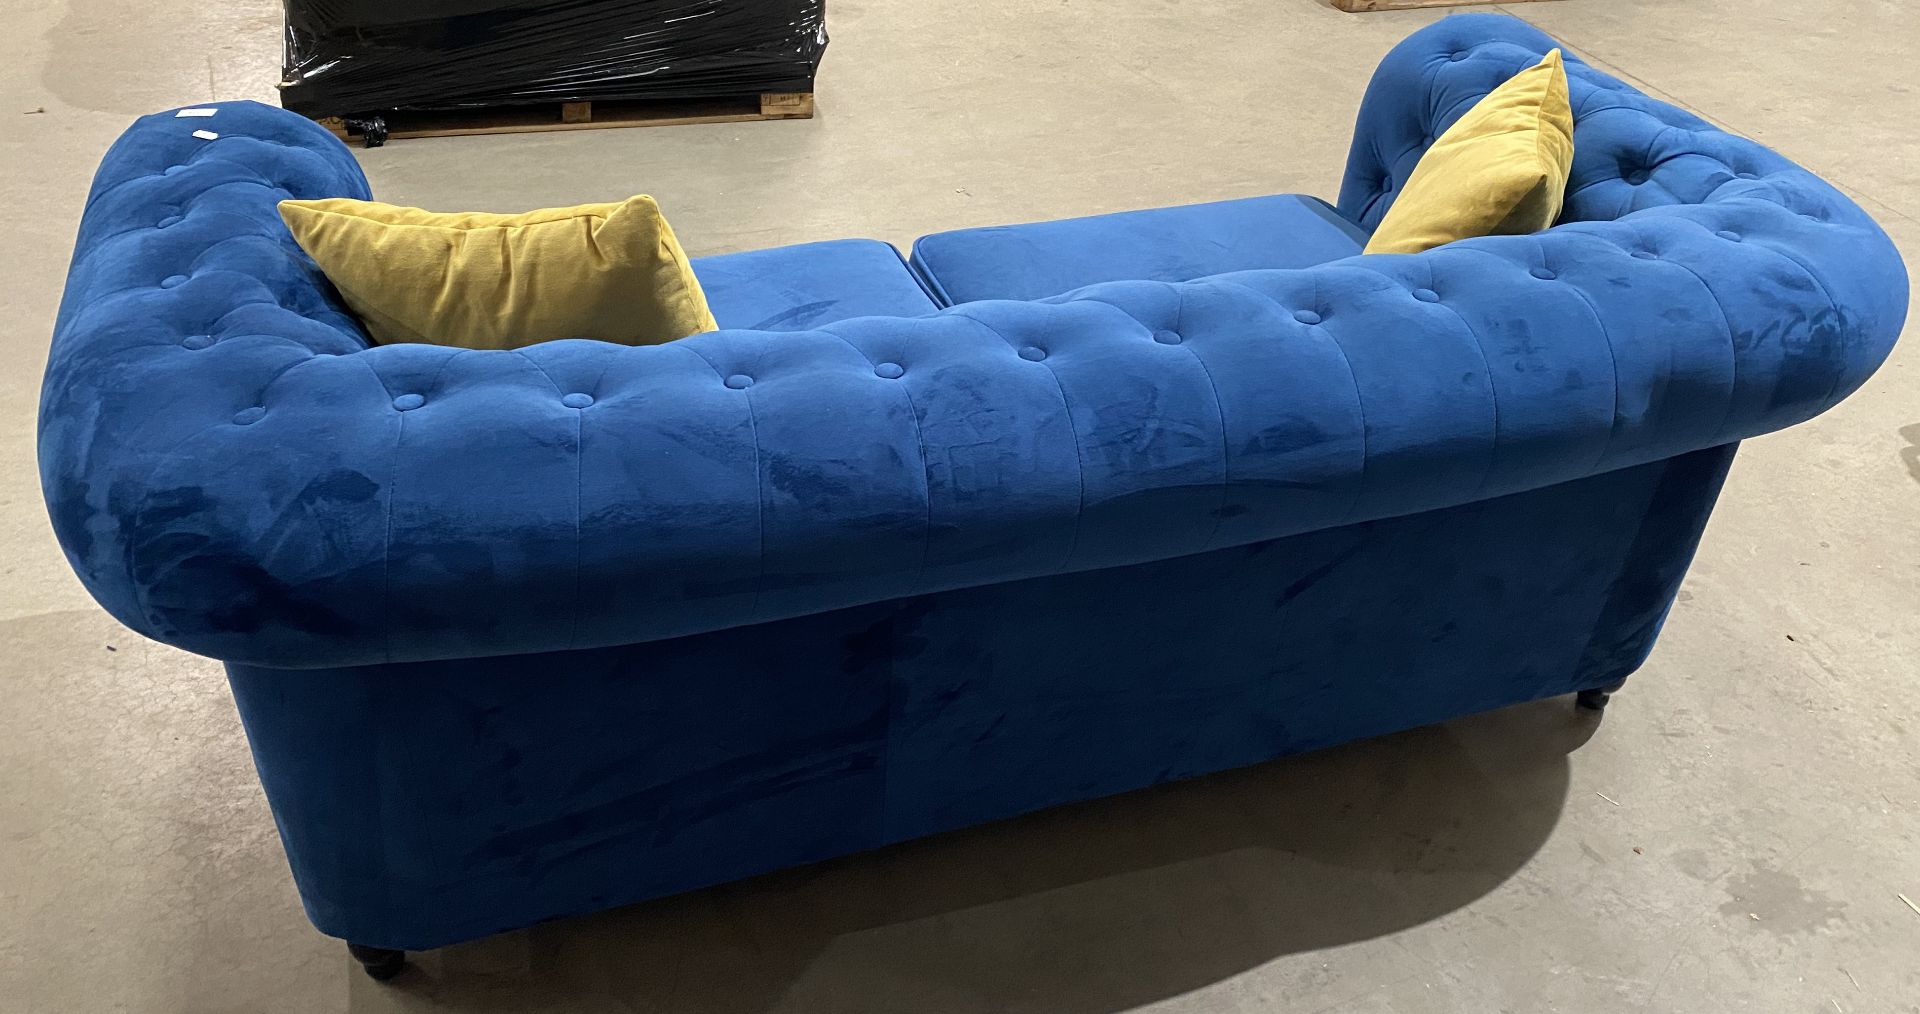 Blue upholstered button-backed Chesterfield style 2-seater sofa complete with cushions (saleroom - Image 10 of 11